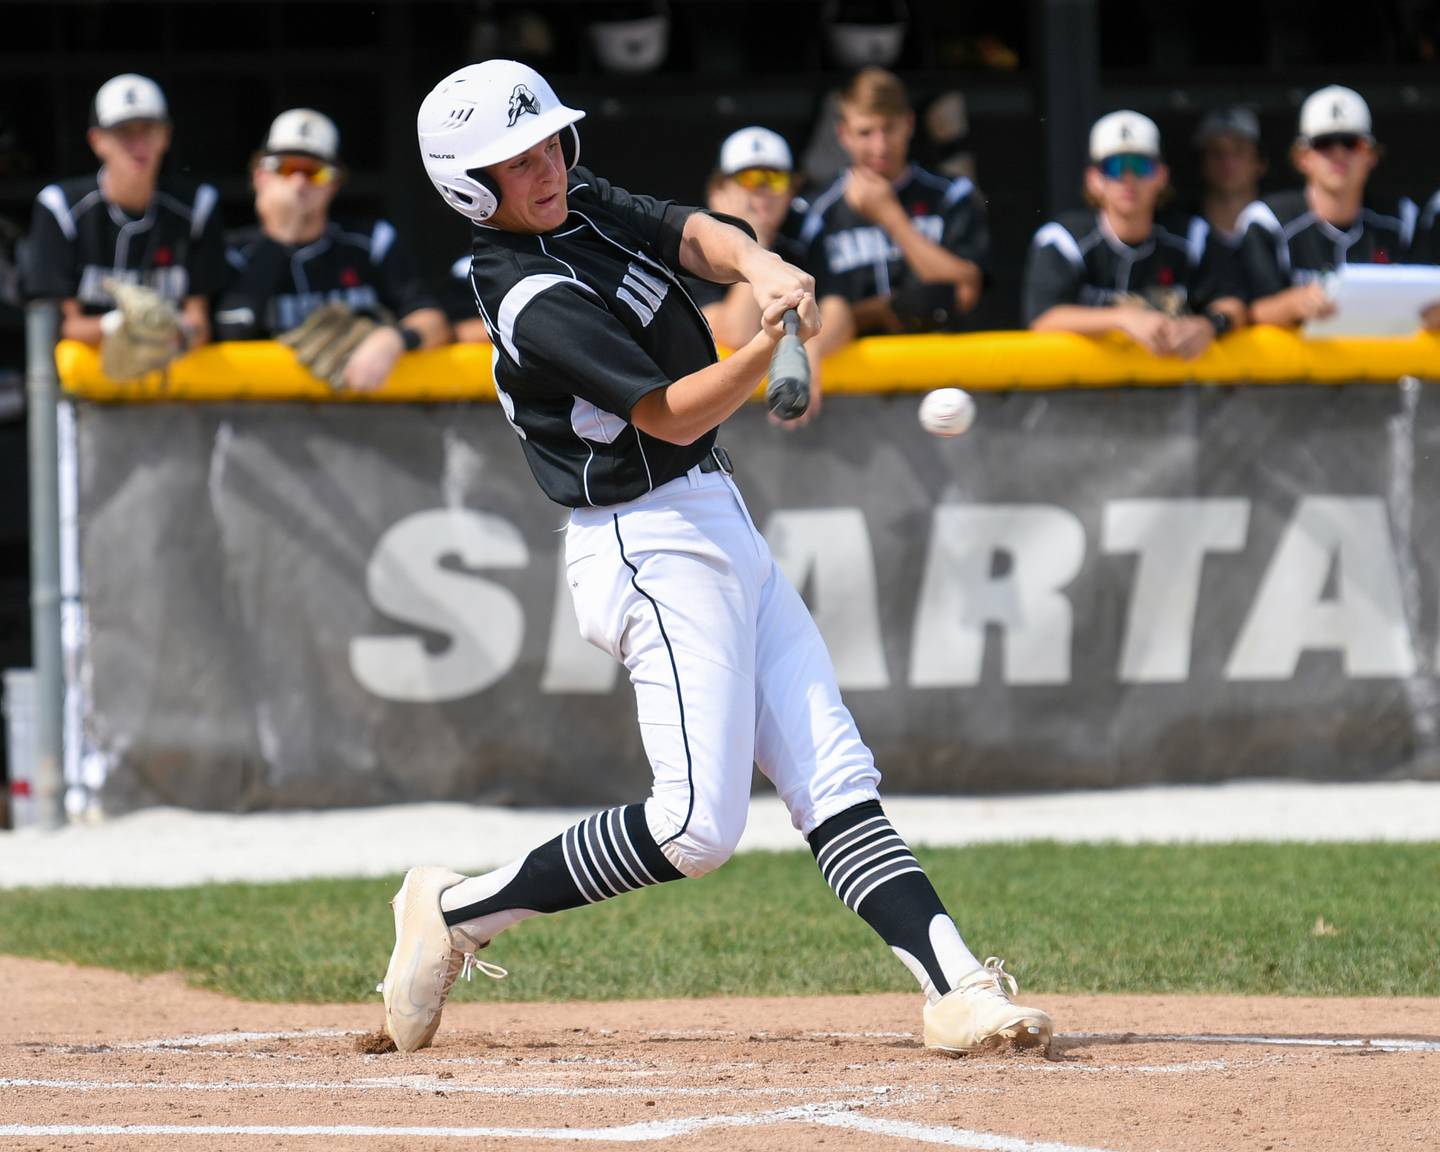 Kaneland Johnny Spallasso (24) makes contact with the ball to score some runs early in the game on Wednesday June 1st while taking on Dixon High School during a sectional play off game held in Sycamore.